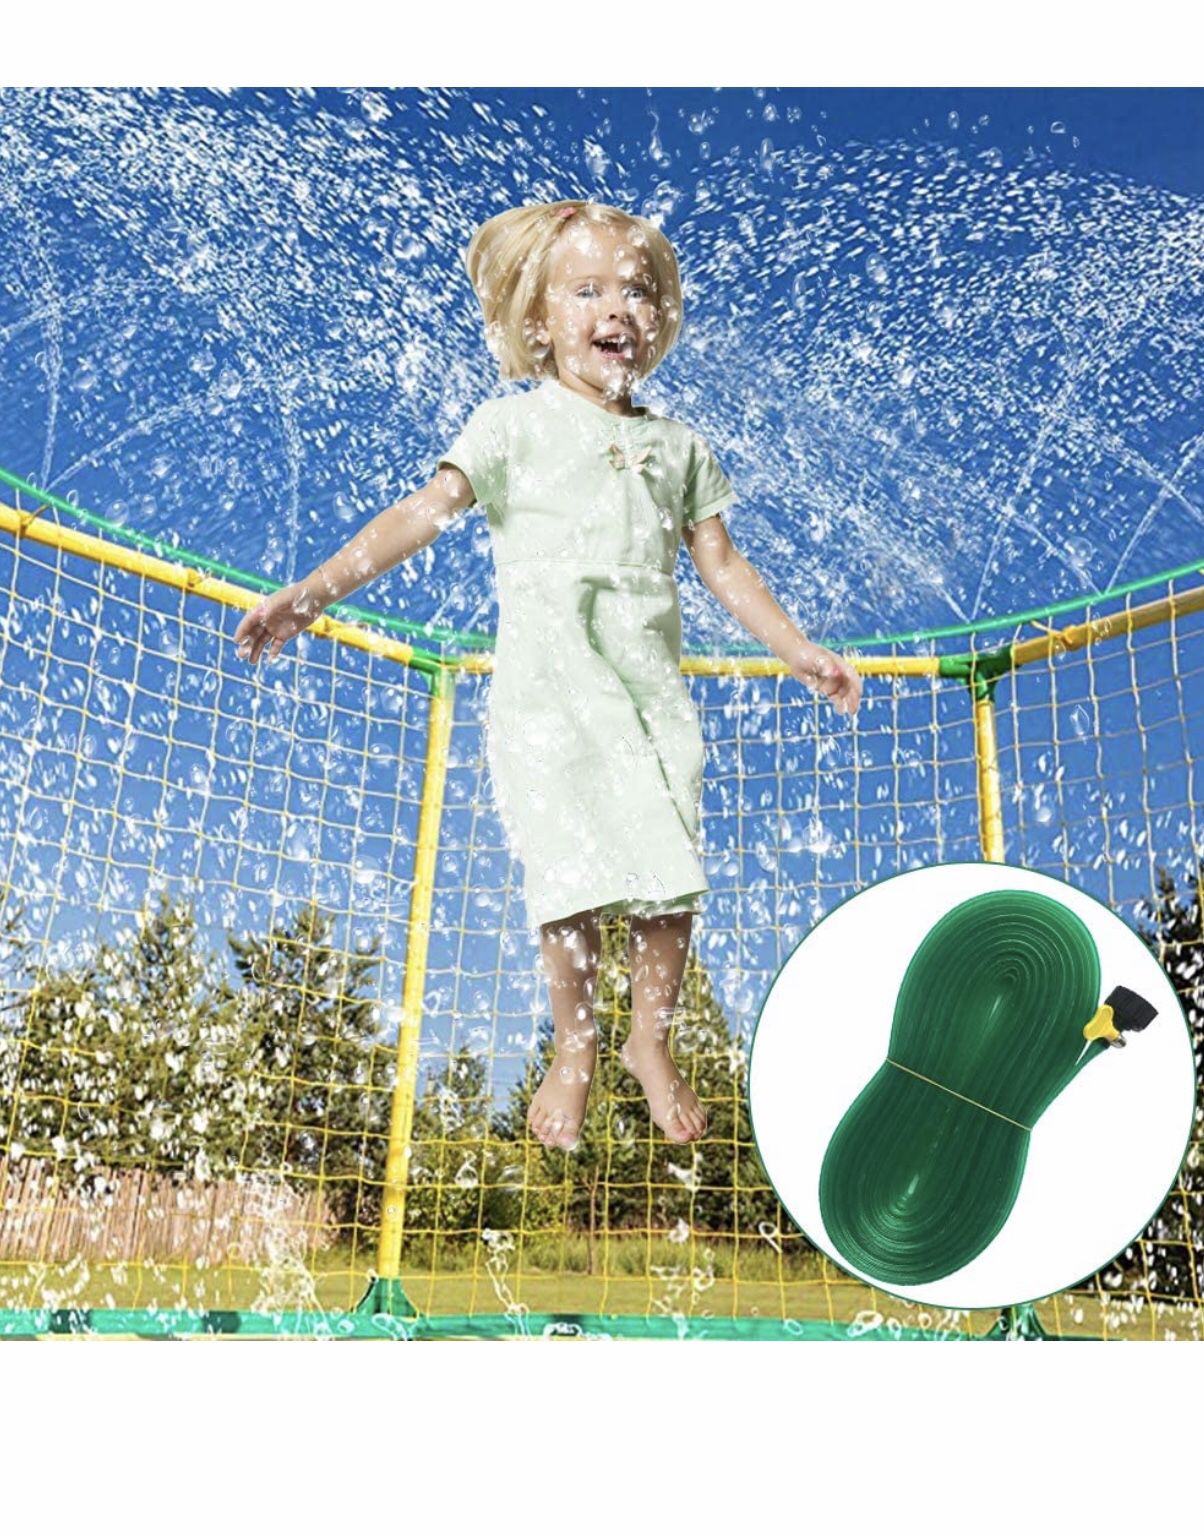 39FT Trampoline Water Sprinkler for Kids and Adults,Summer Outdoor Waterpark Water Party Game Toys for Yards, Adjustable for Any Size of Trampoline